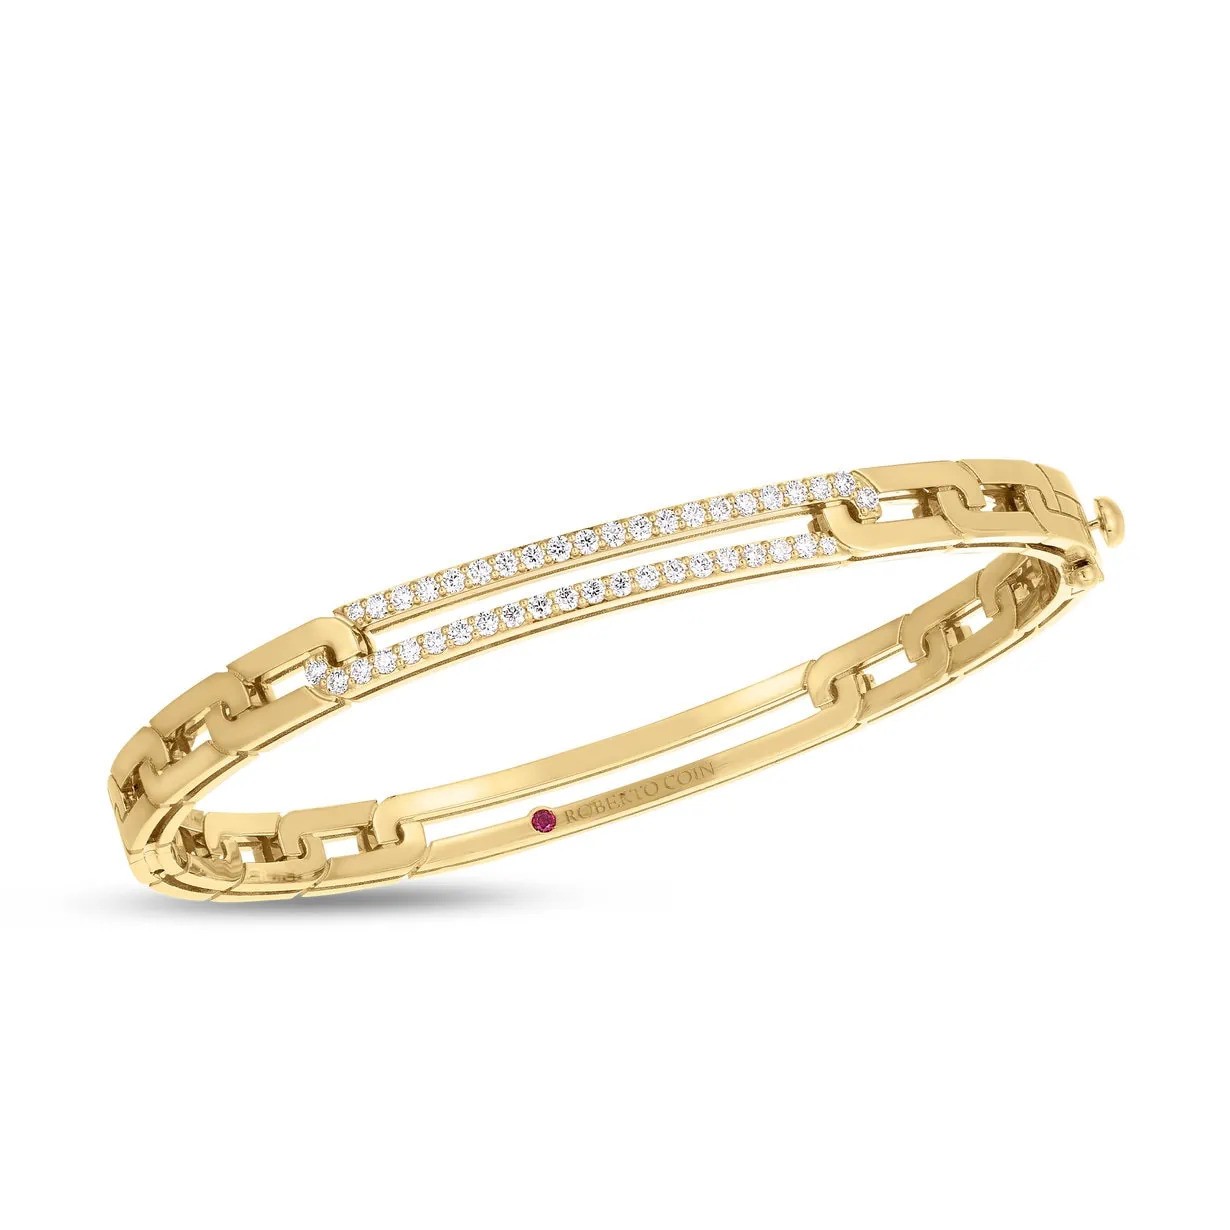 18K Yellow Gold Navarra Pave Extended Link Bangle